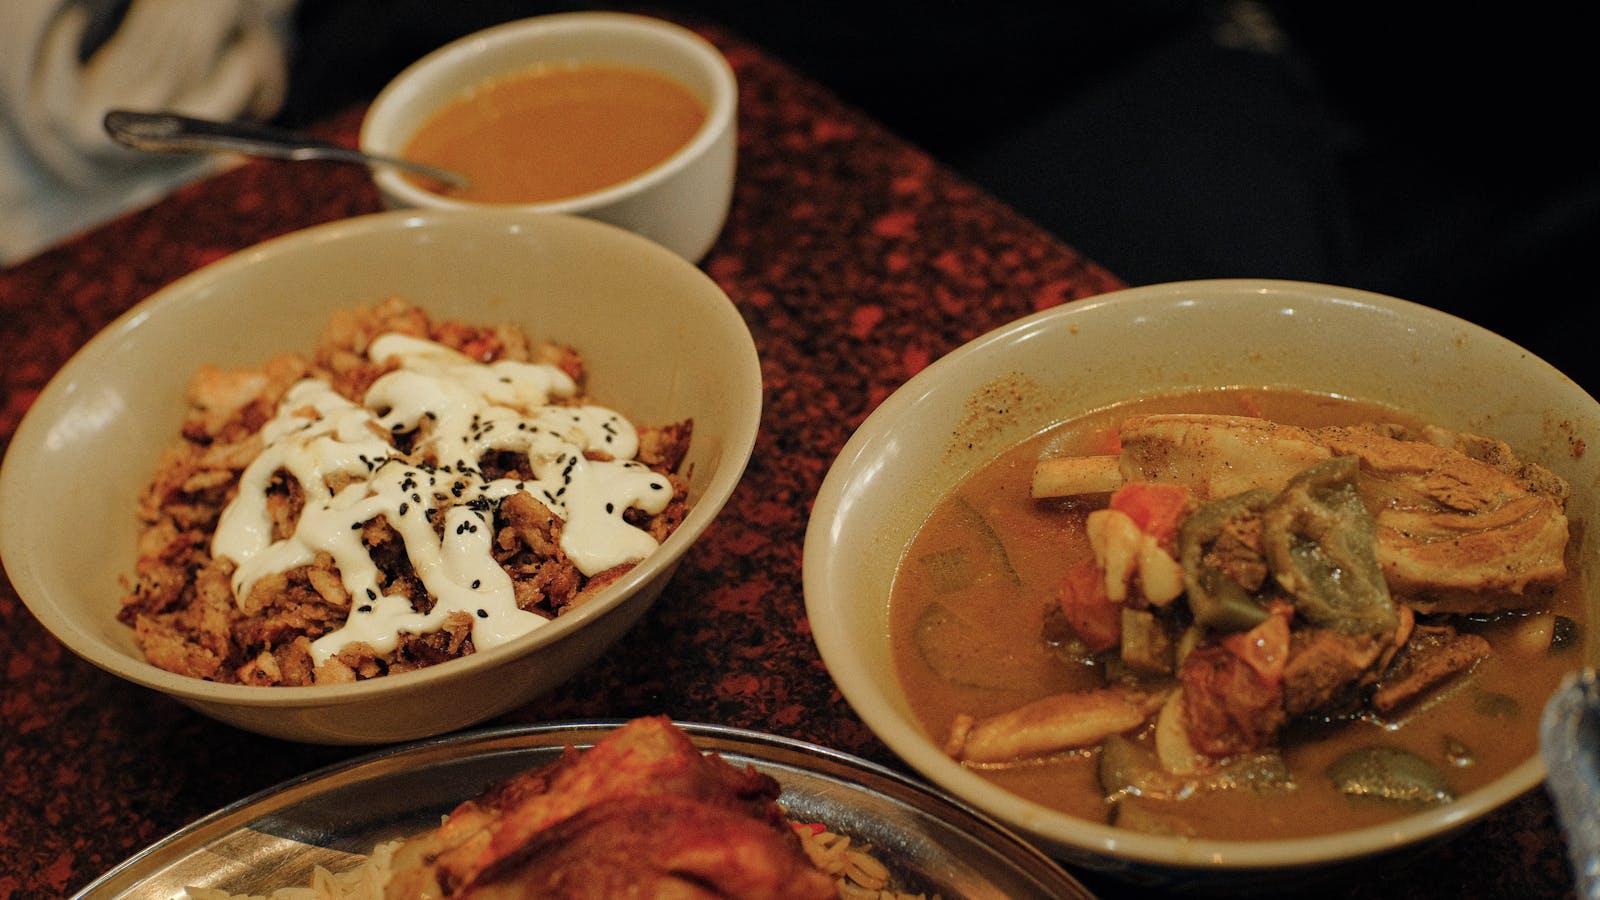 Several dishes from Yemen Cafe in New York City.